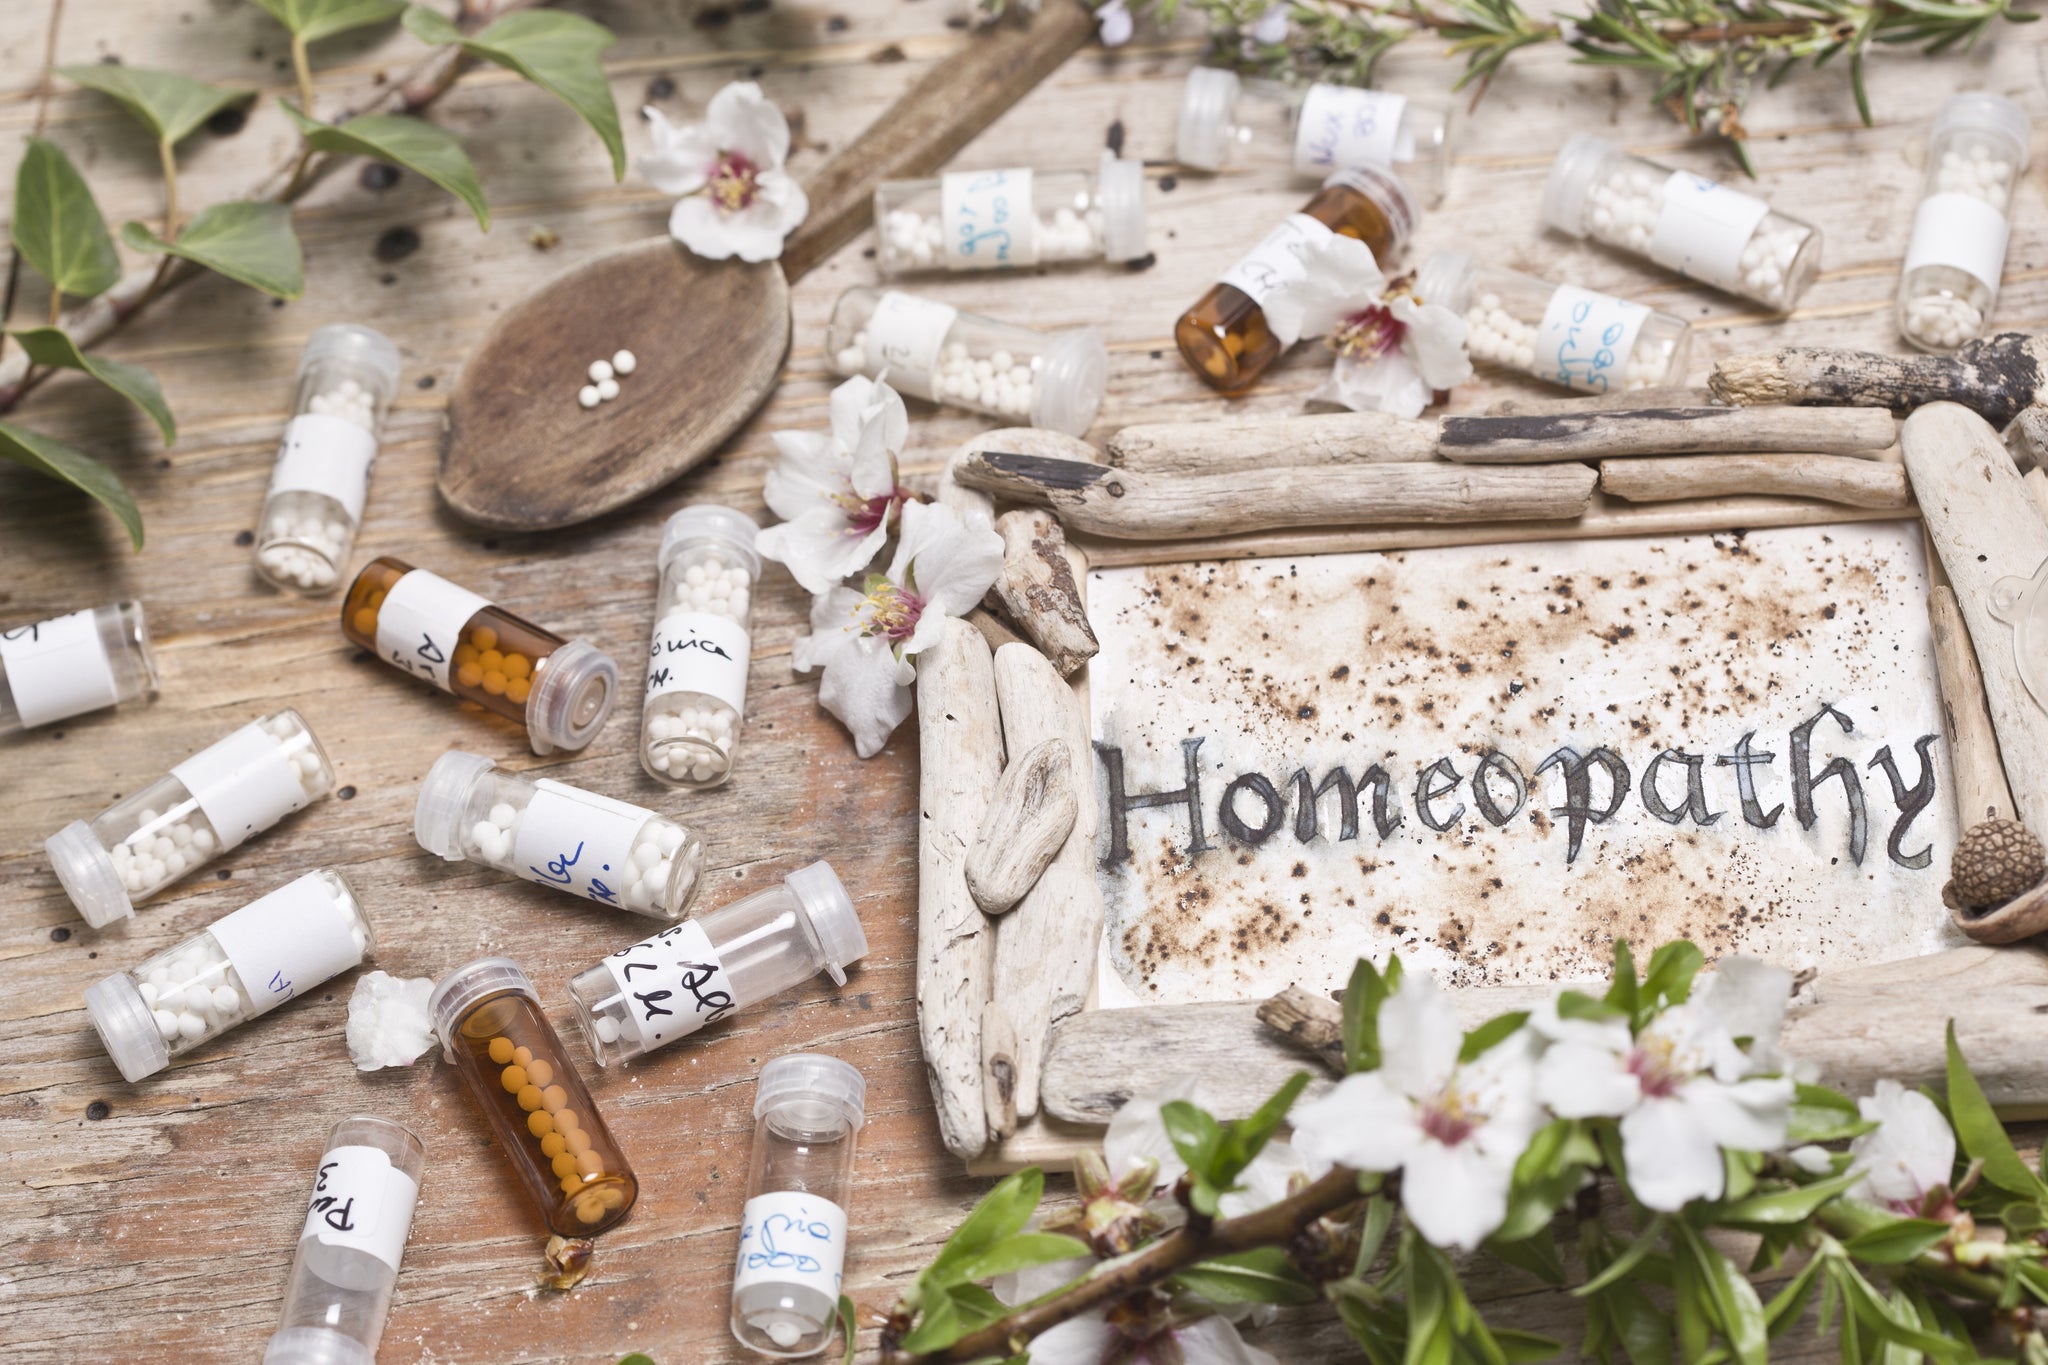 First Homeopathy Camp